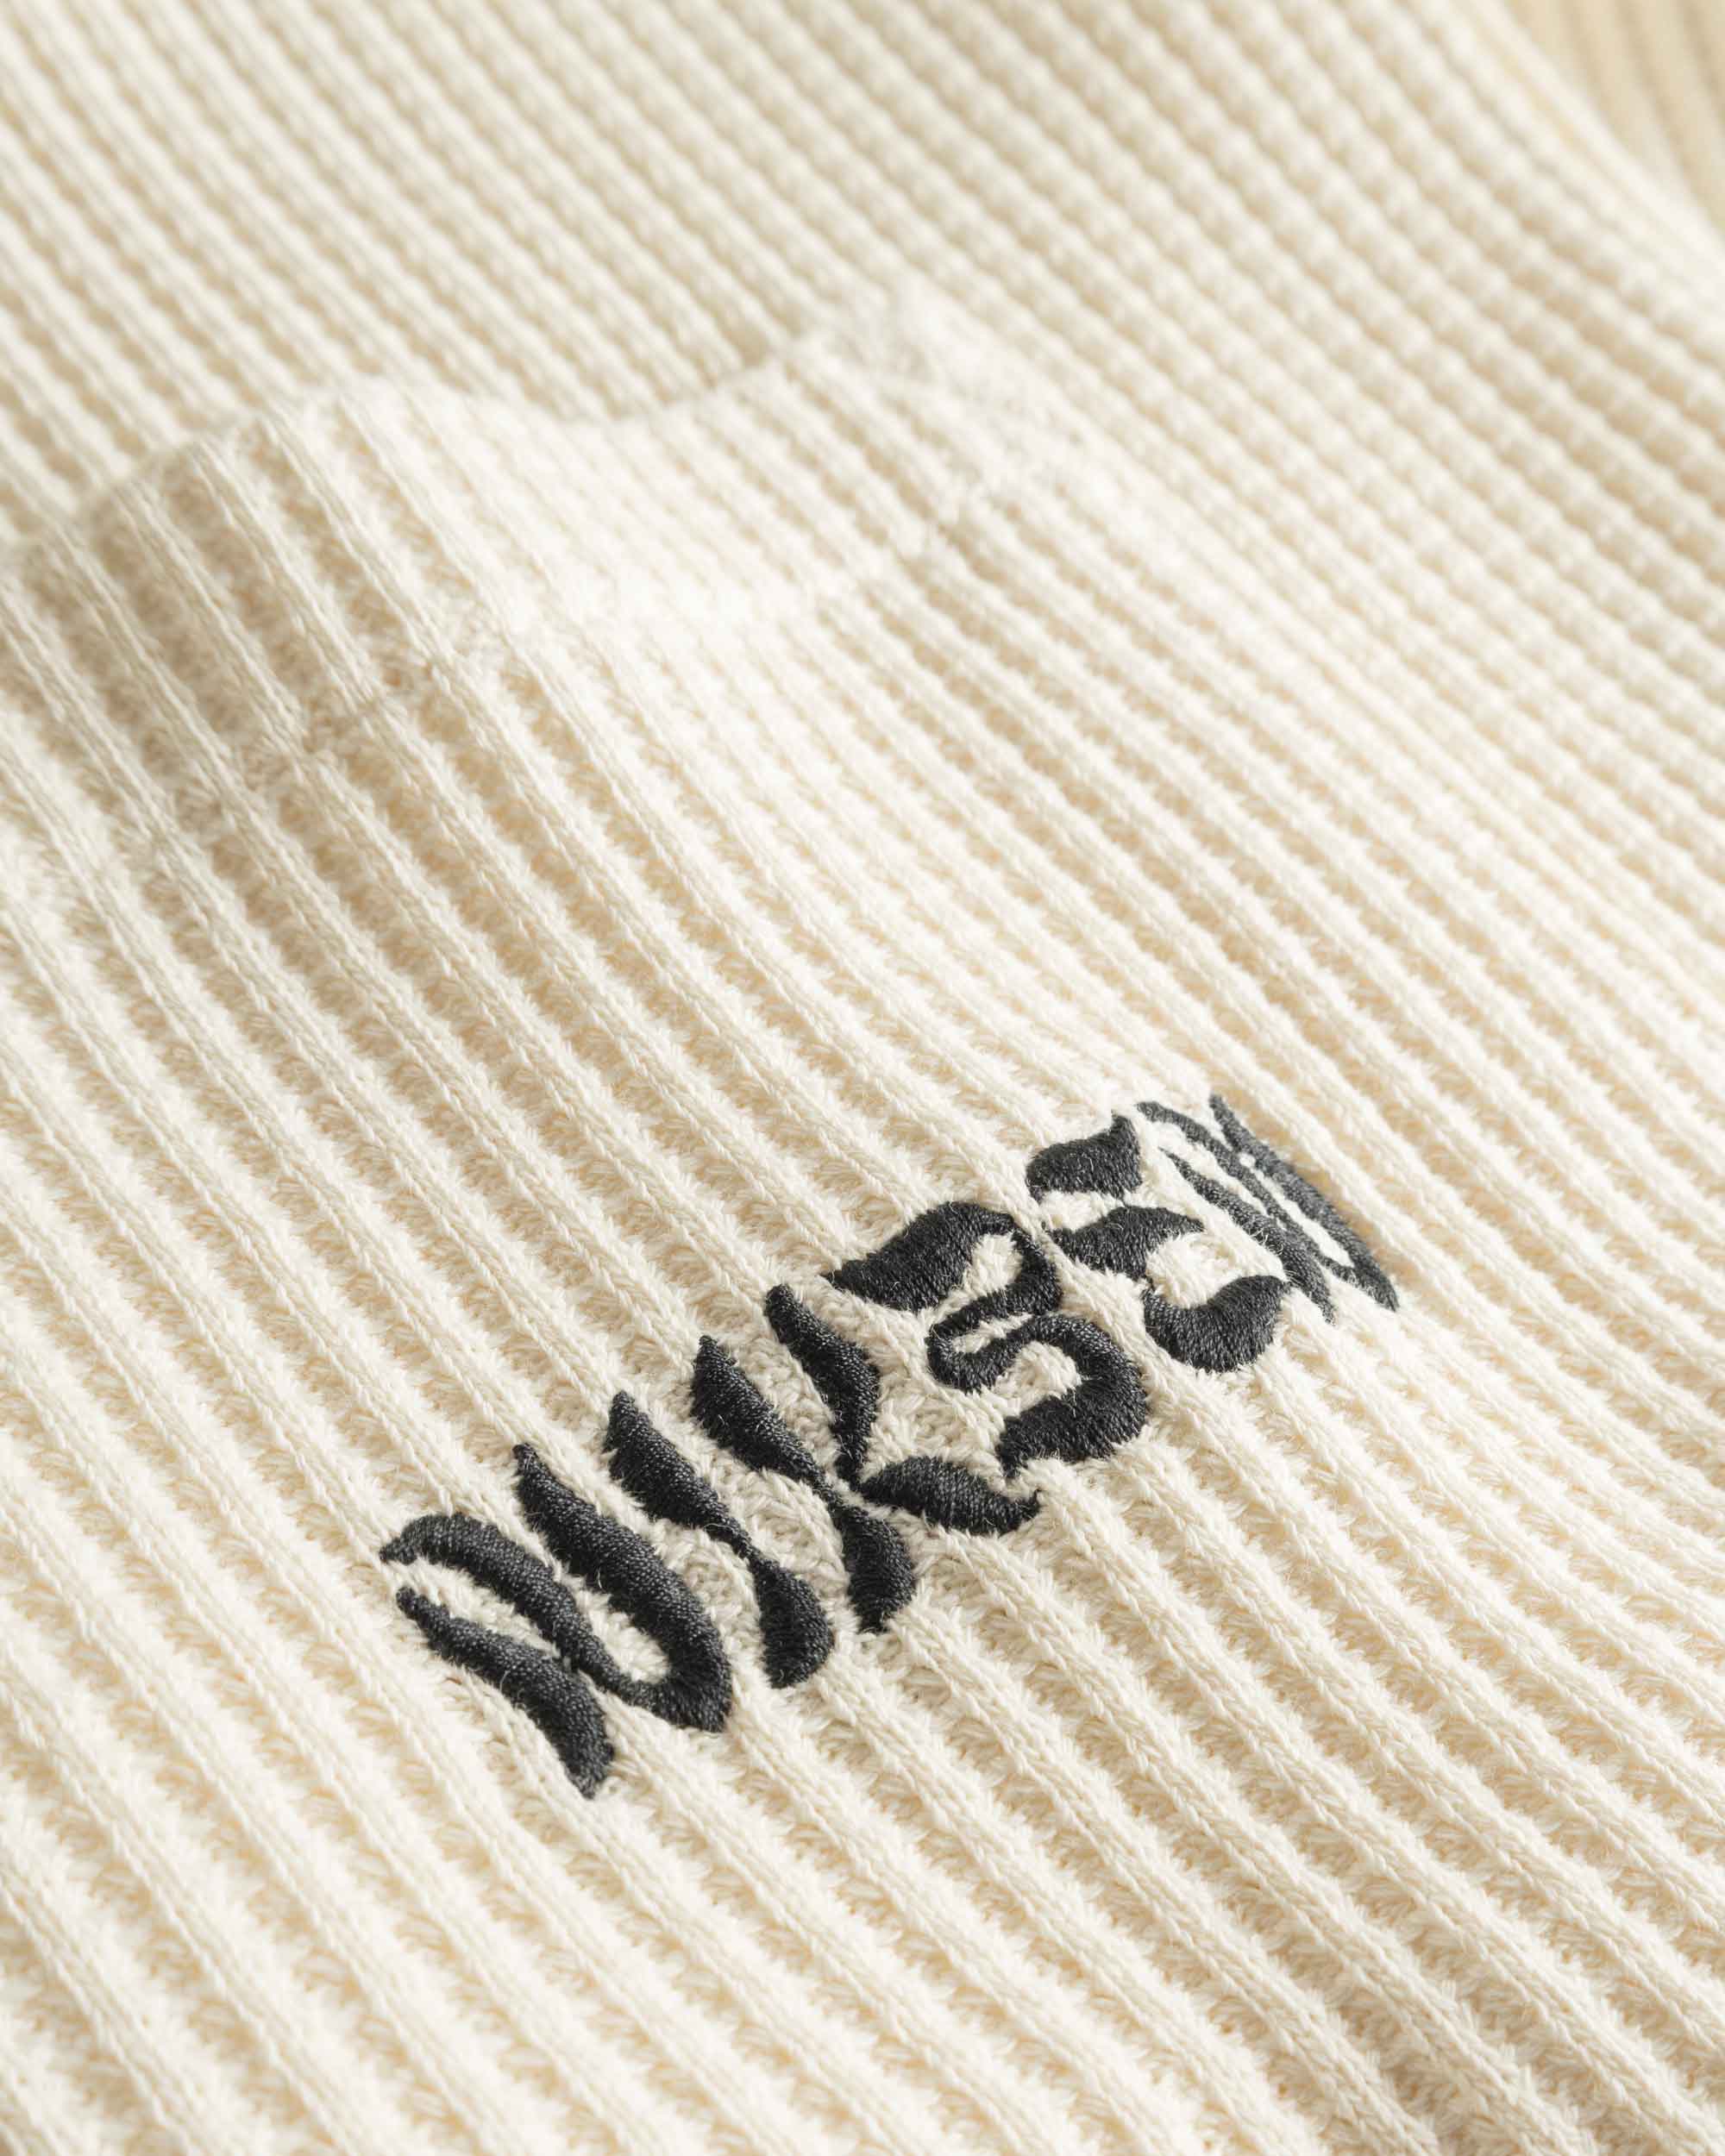 Close-up view of front pocket with stitched black logo on an off white waffle-patterned shirt